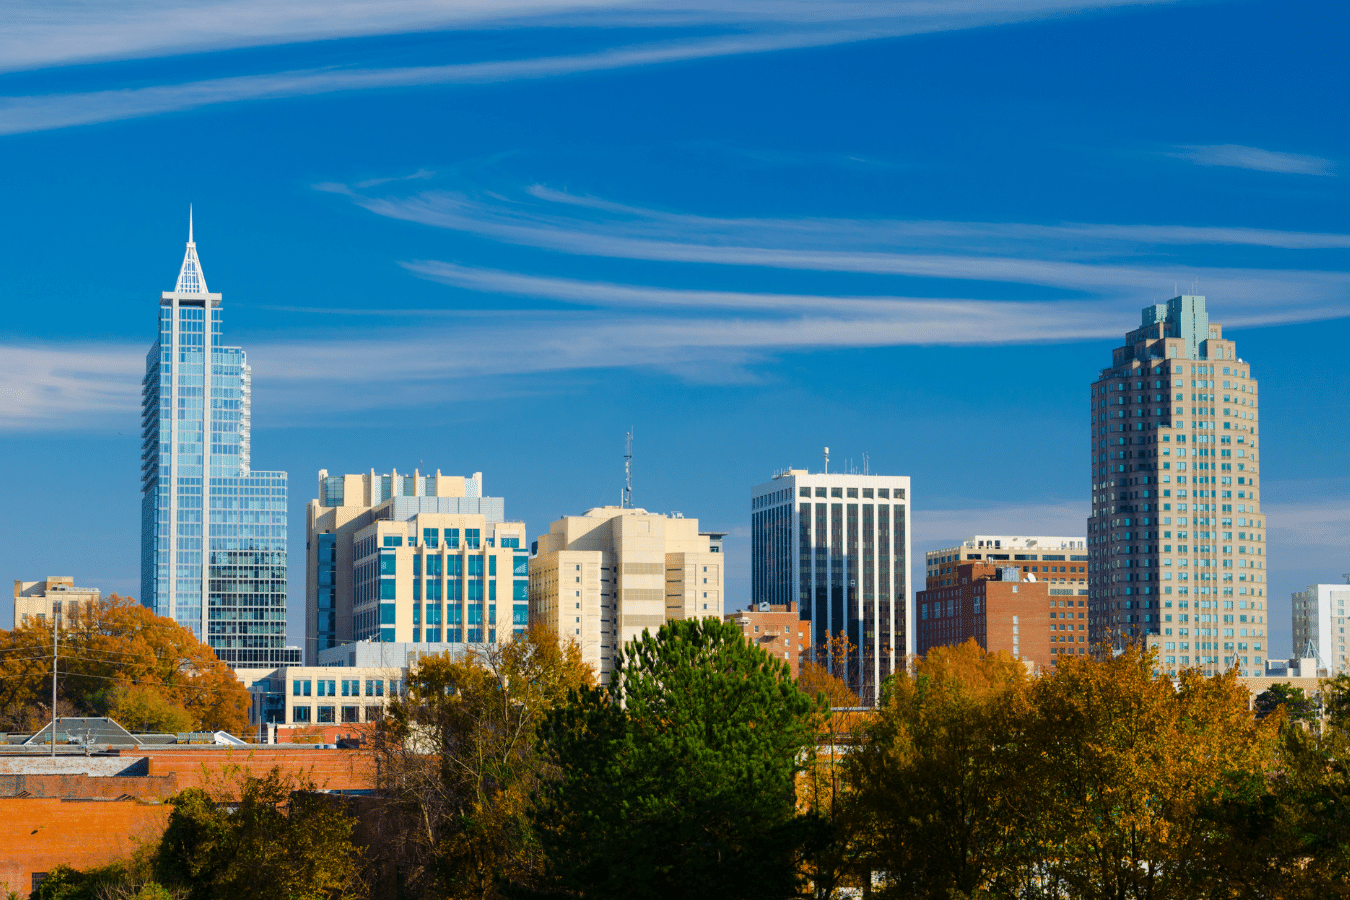 Downtown Raleigh Skyline 15 minutes away from Clayton NC